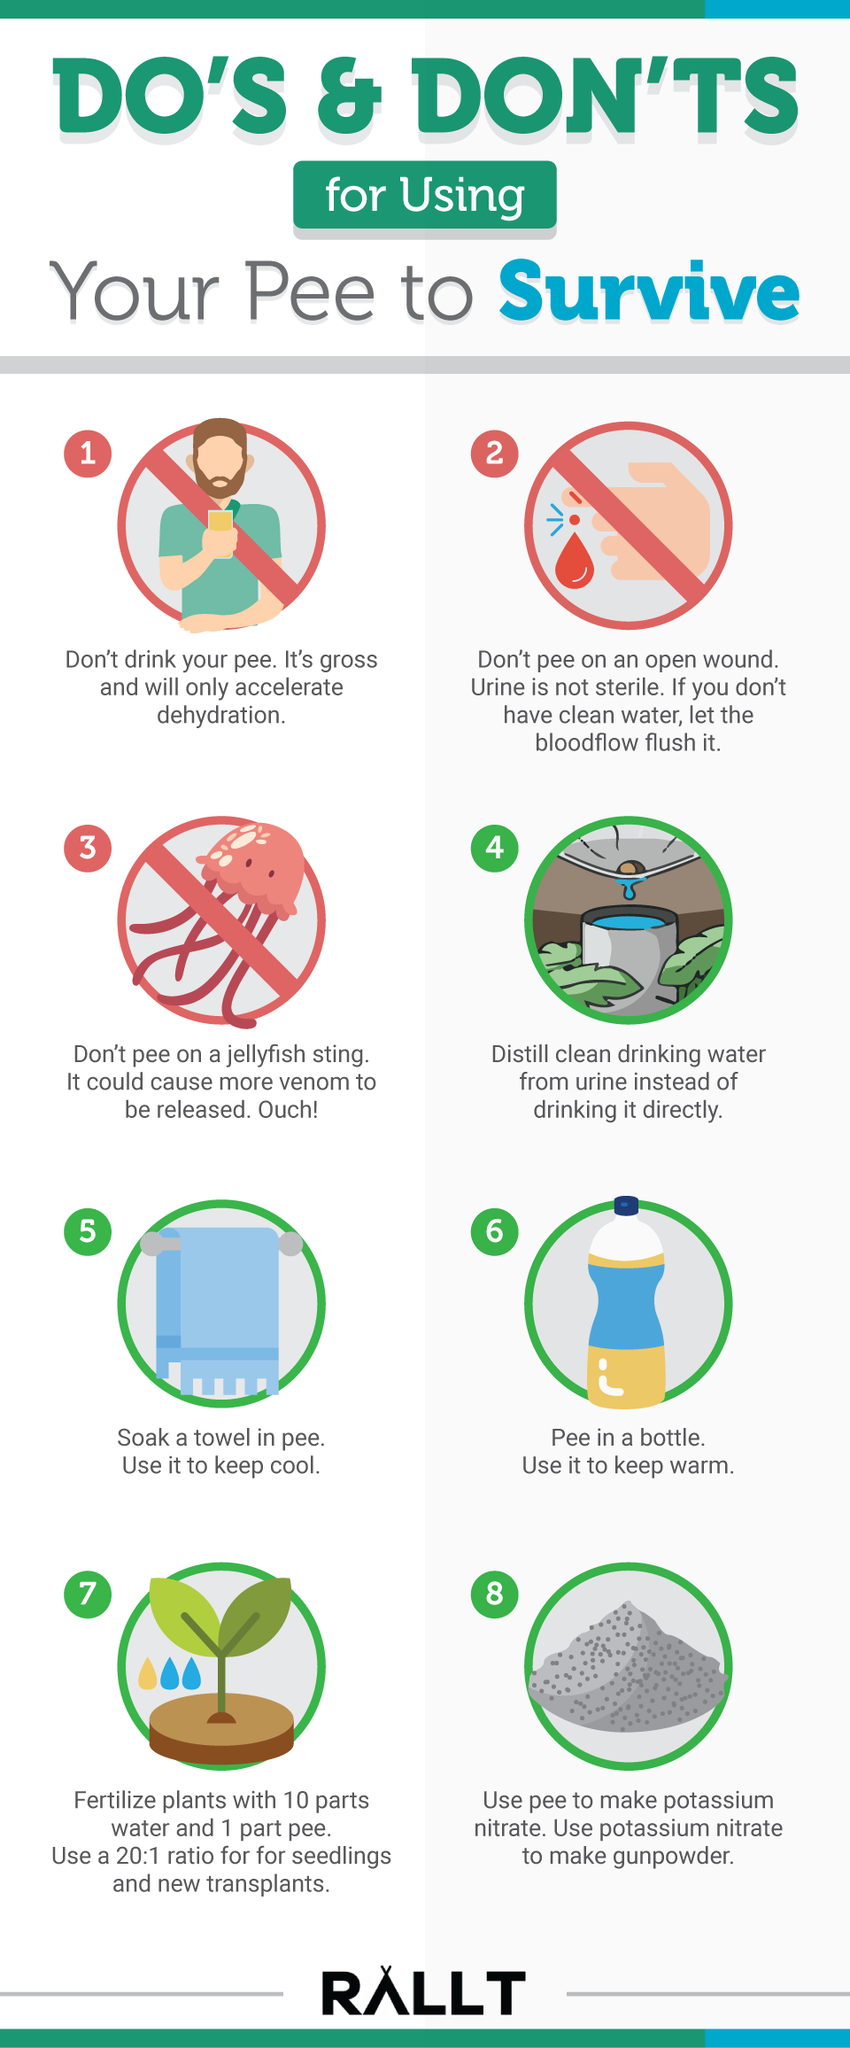 Dos & Don'ts for Using Your Pee to Survive